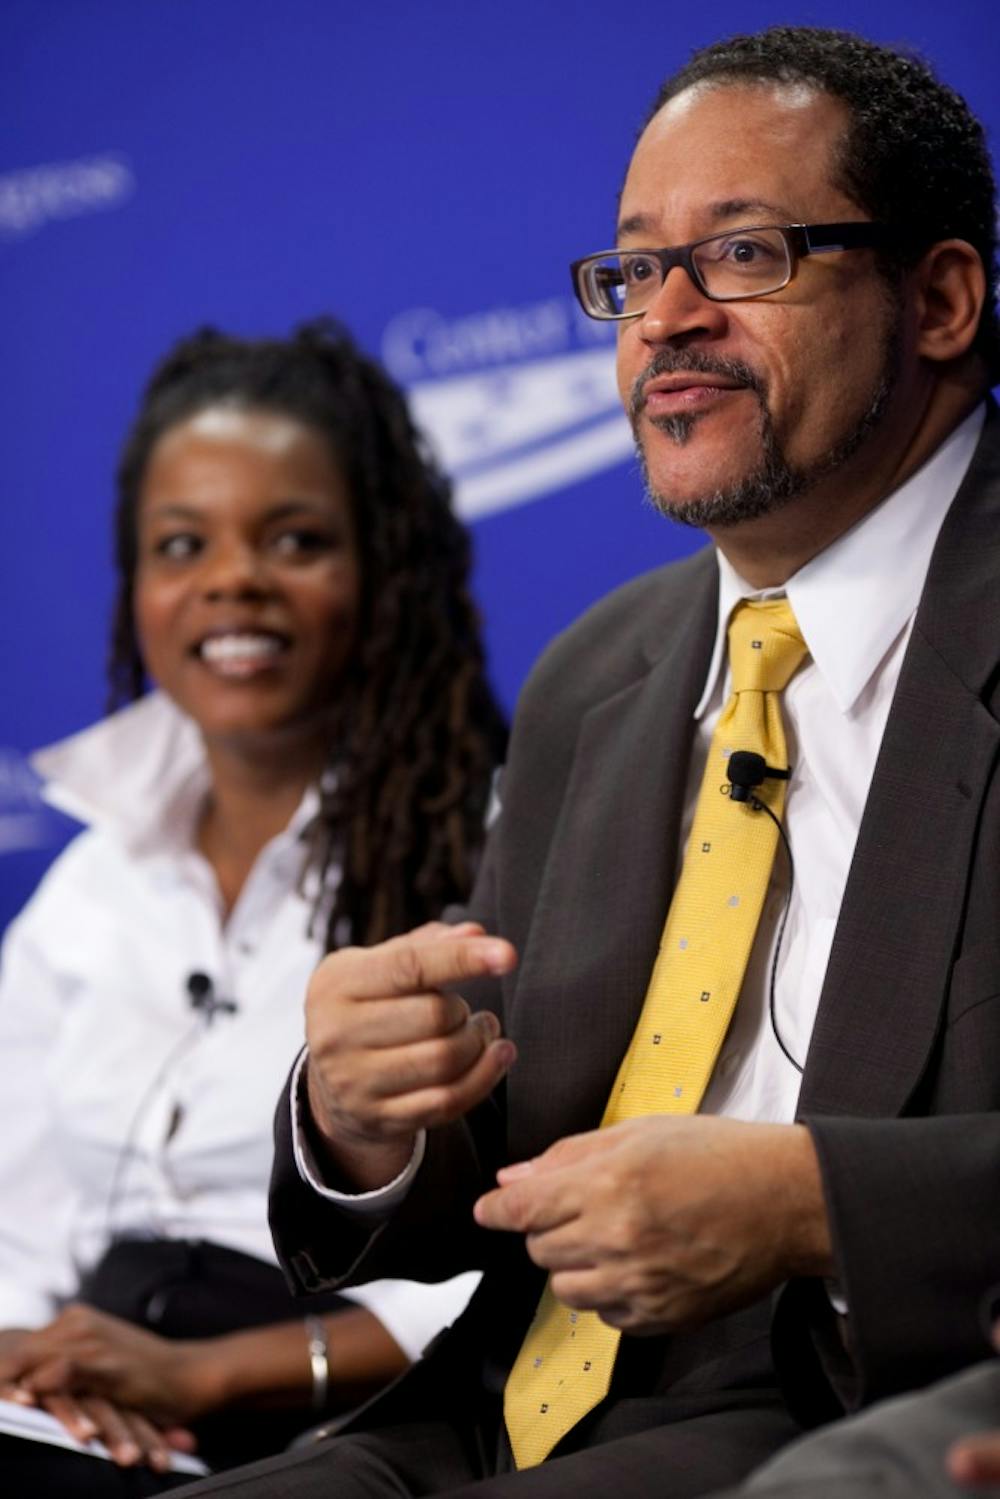 <p>Dr. Michael Eric Dyson speaking for Center for American Progress June 22, 2010. Dyson has written and edited more than 20 non-fiction books on race relations and popular culture and has spoken on several media outlets and stages. <strong>Center for American Progress, Photo Courtesy</strong></p>